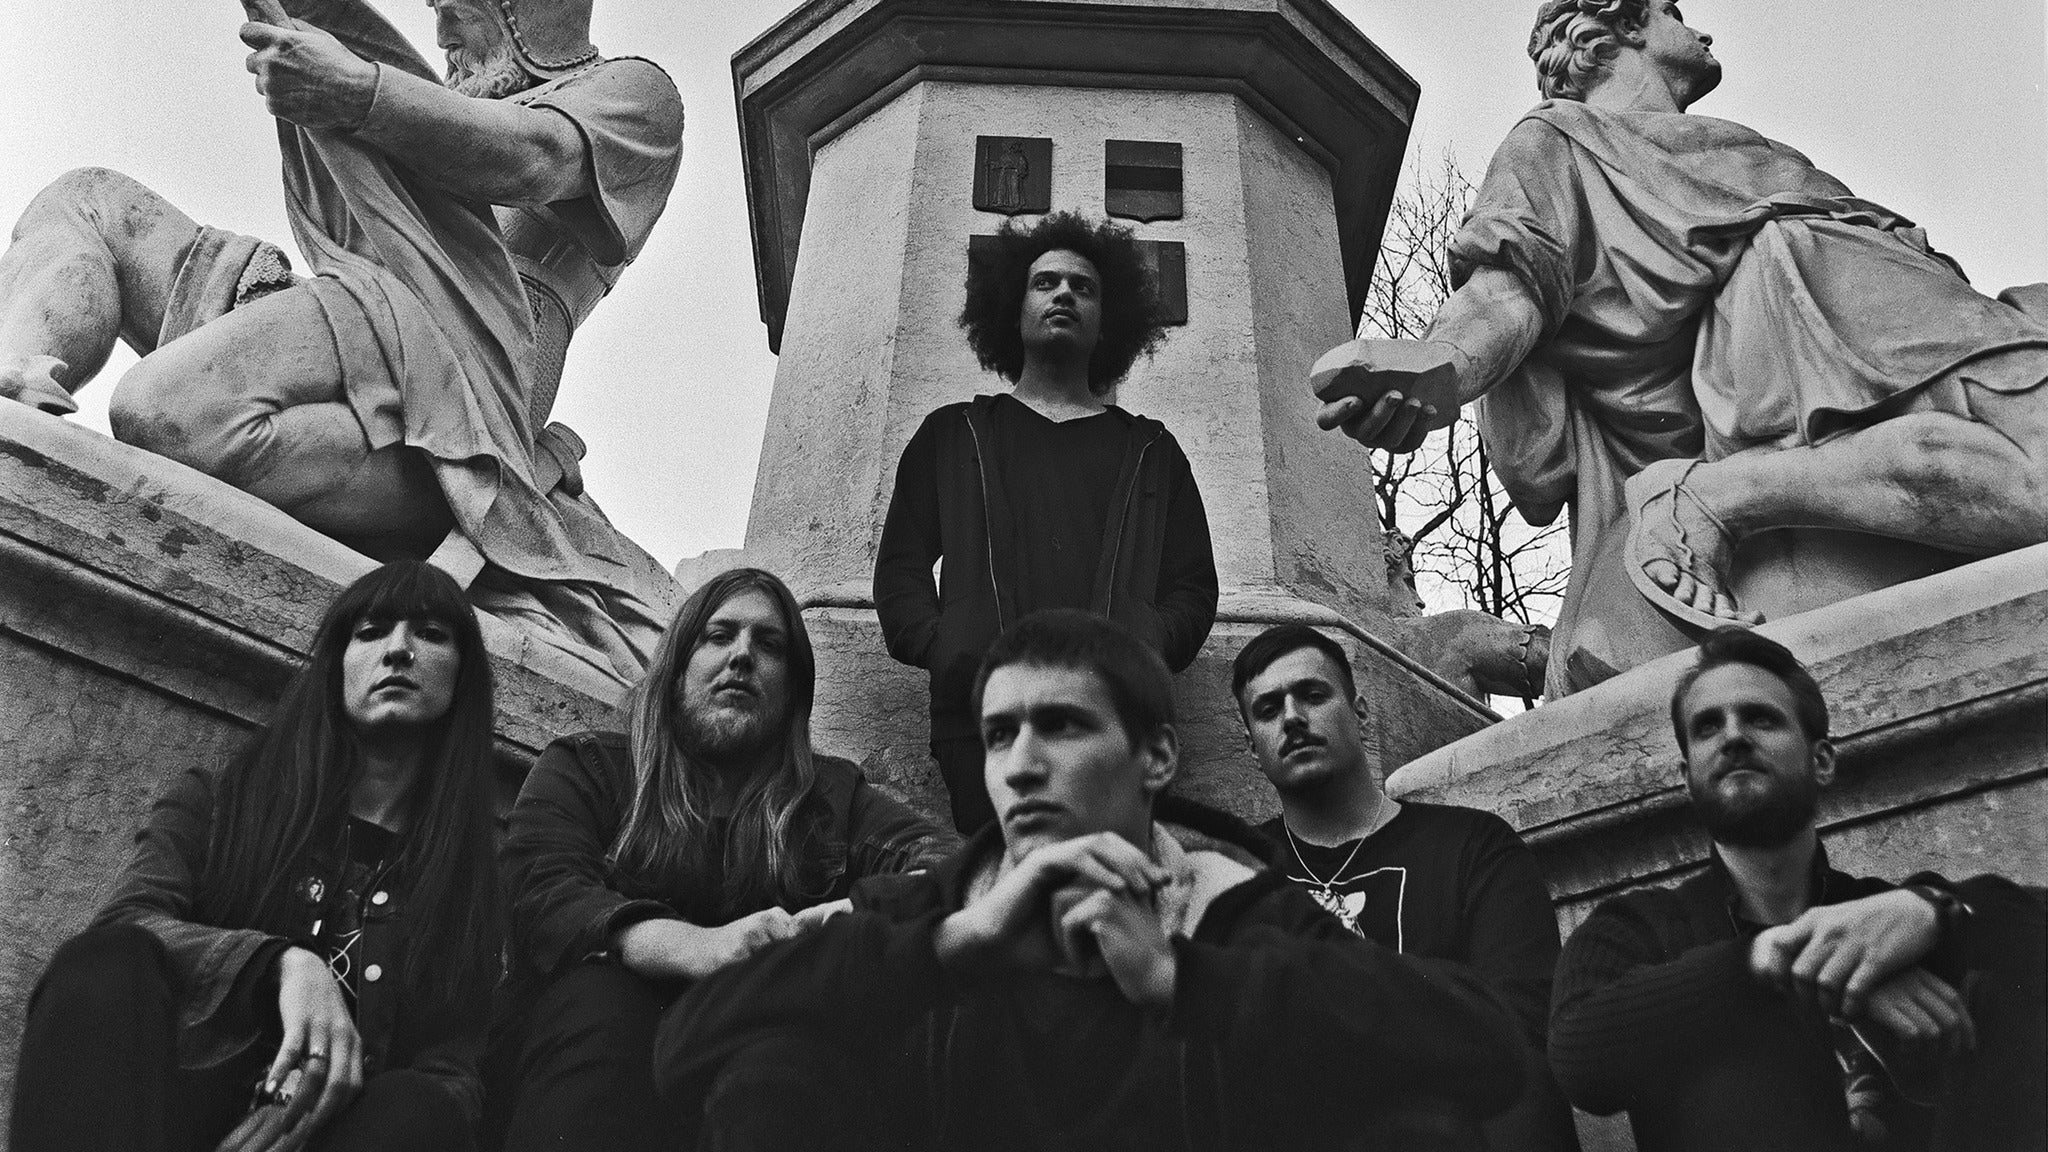 Zeal & Ardor with Sylvaine, & Imperial Triumphant in Los Angeles promo photo for Live Nation presale offer code